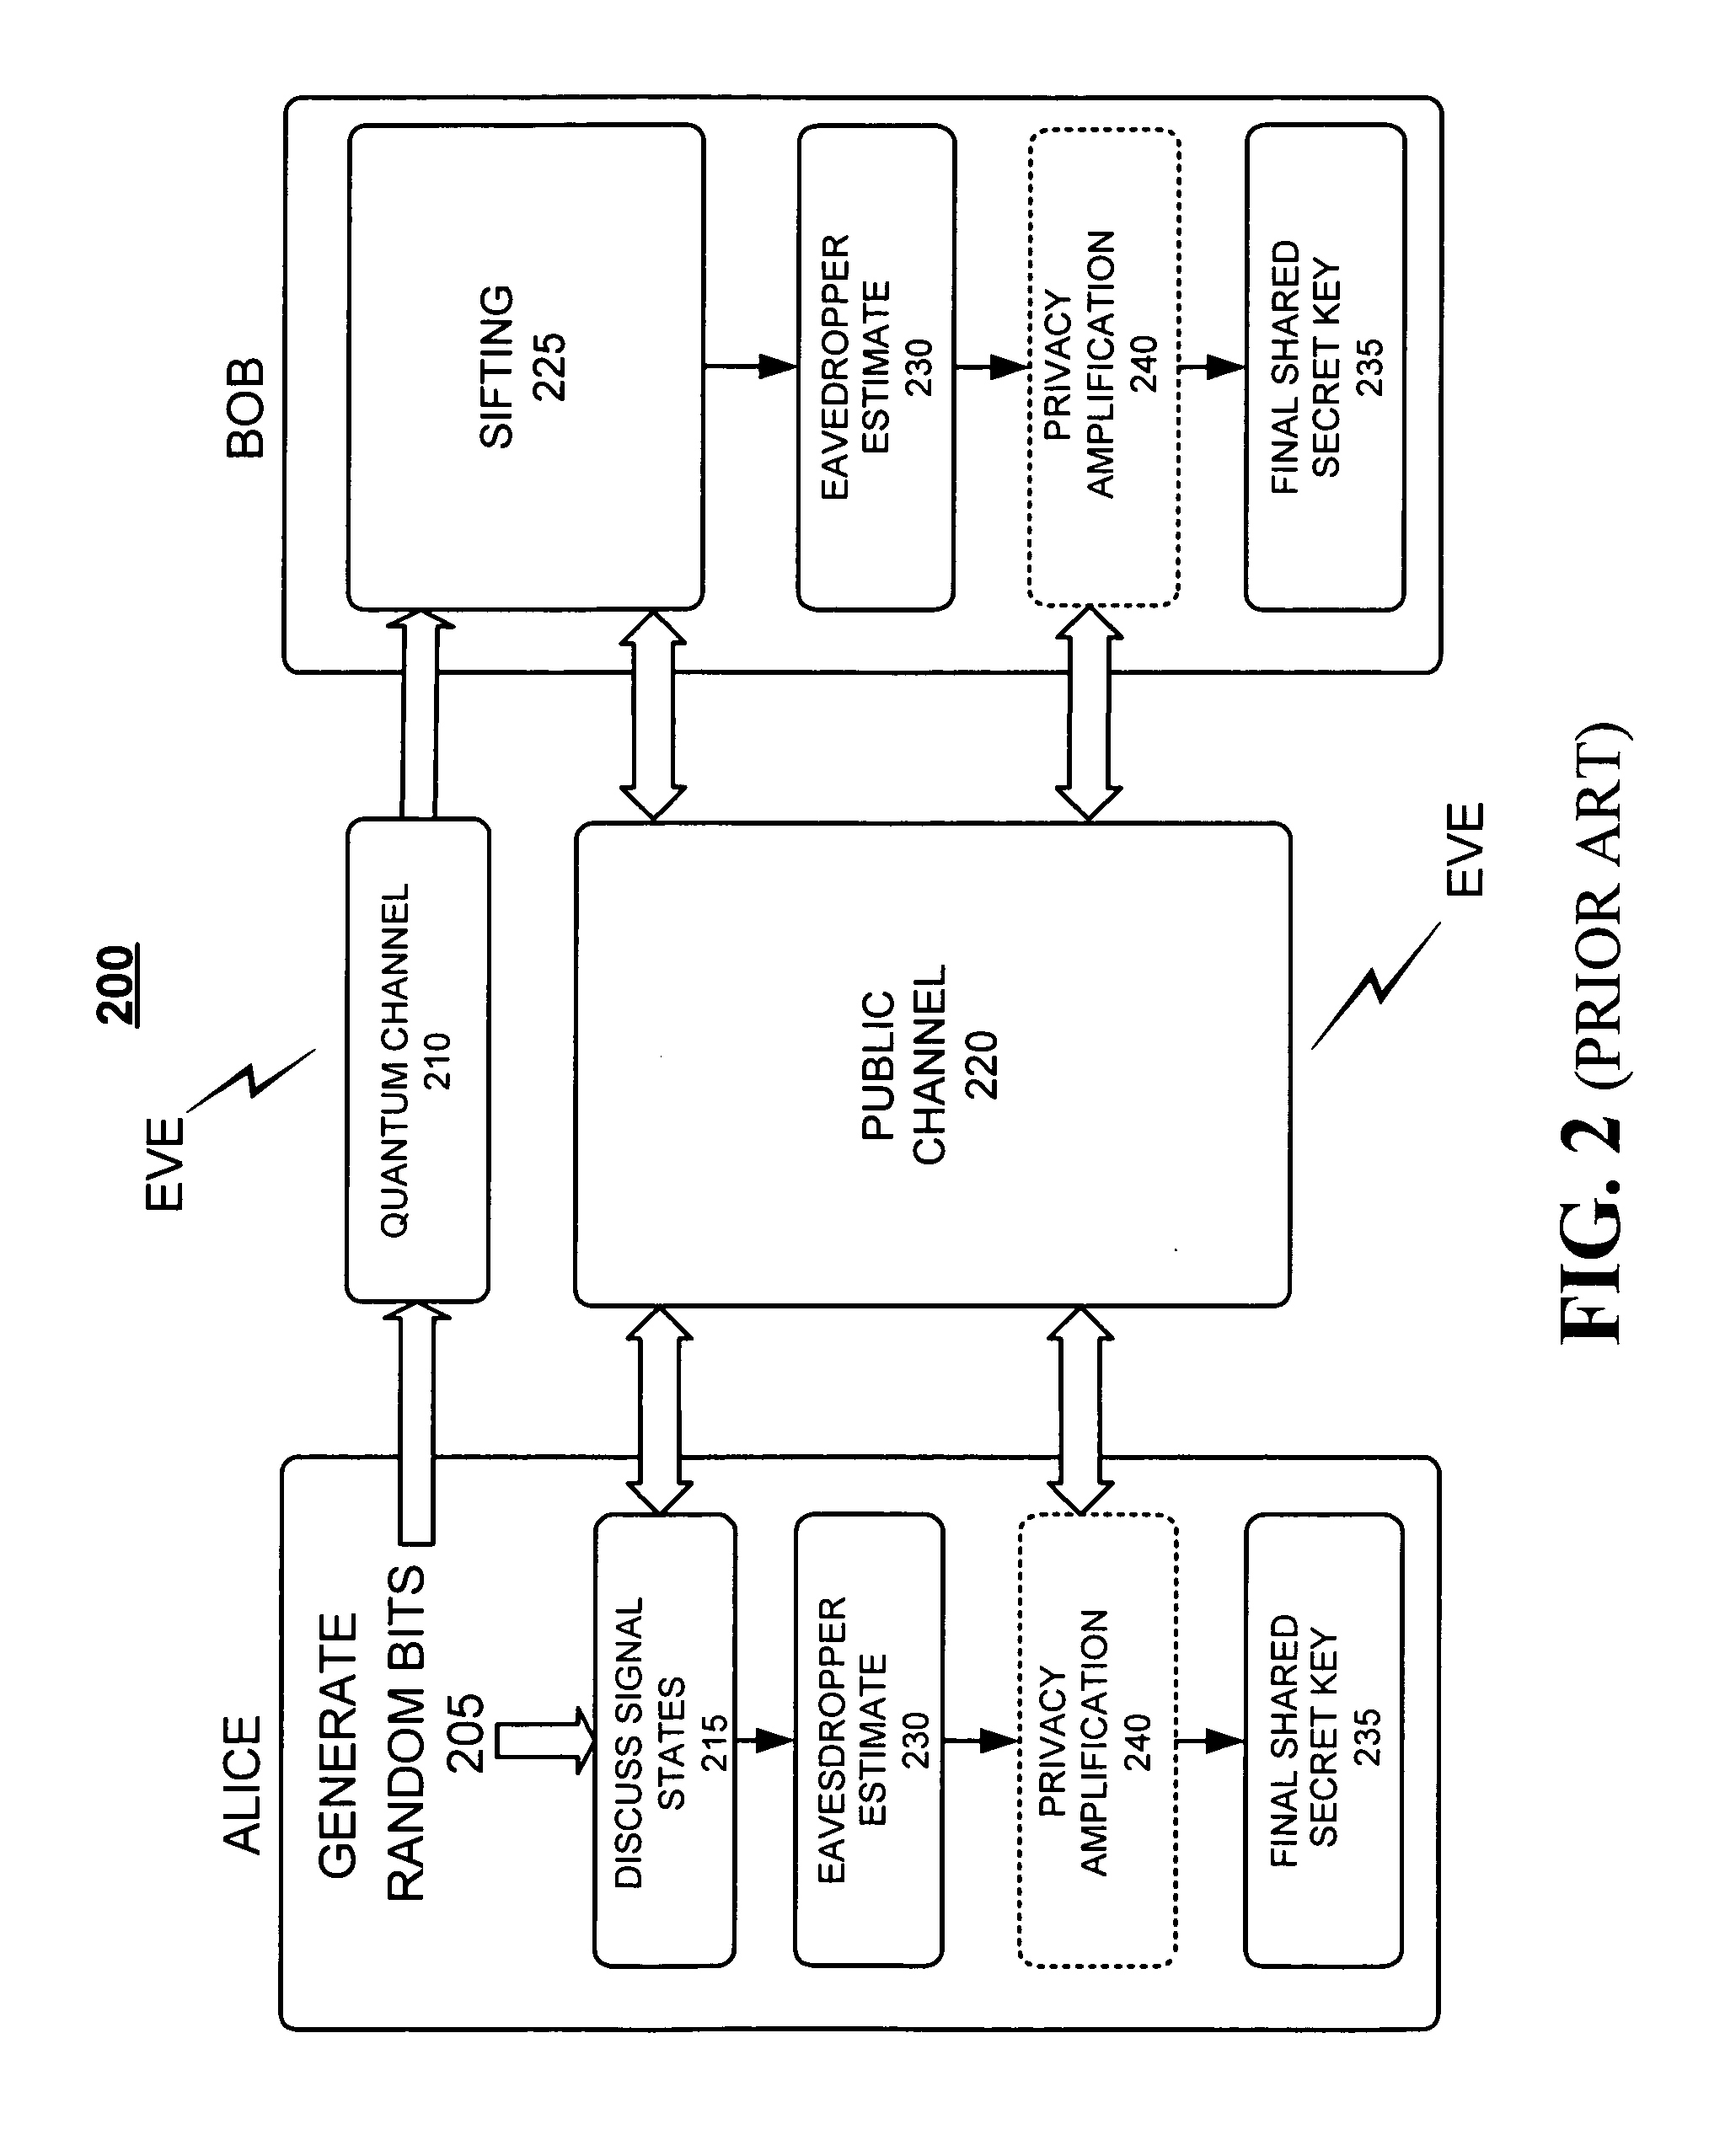 Systems and methods for framing quantum cryptographic links